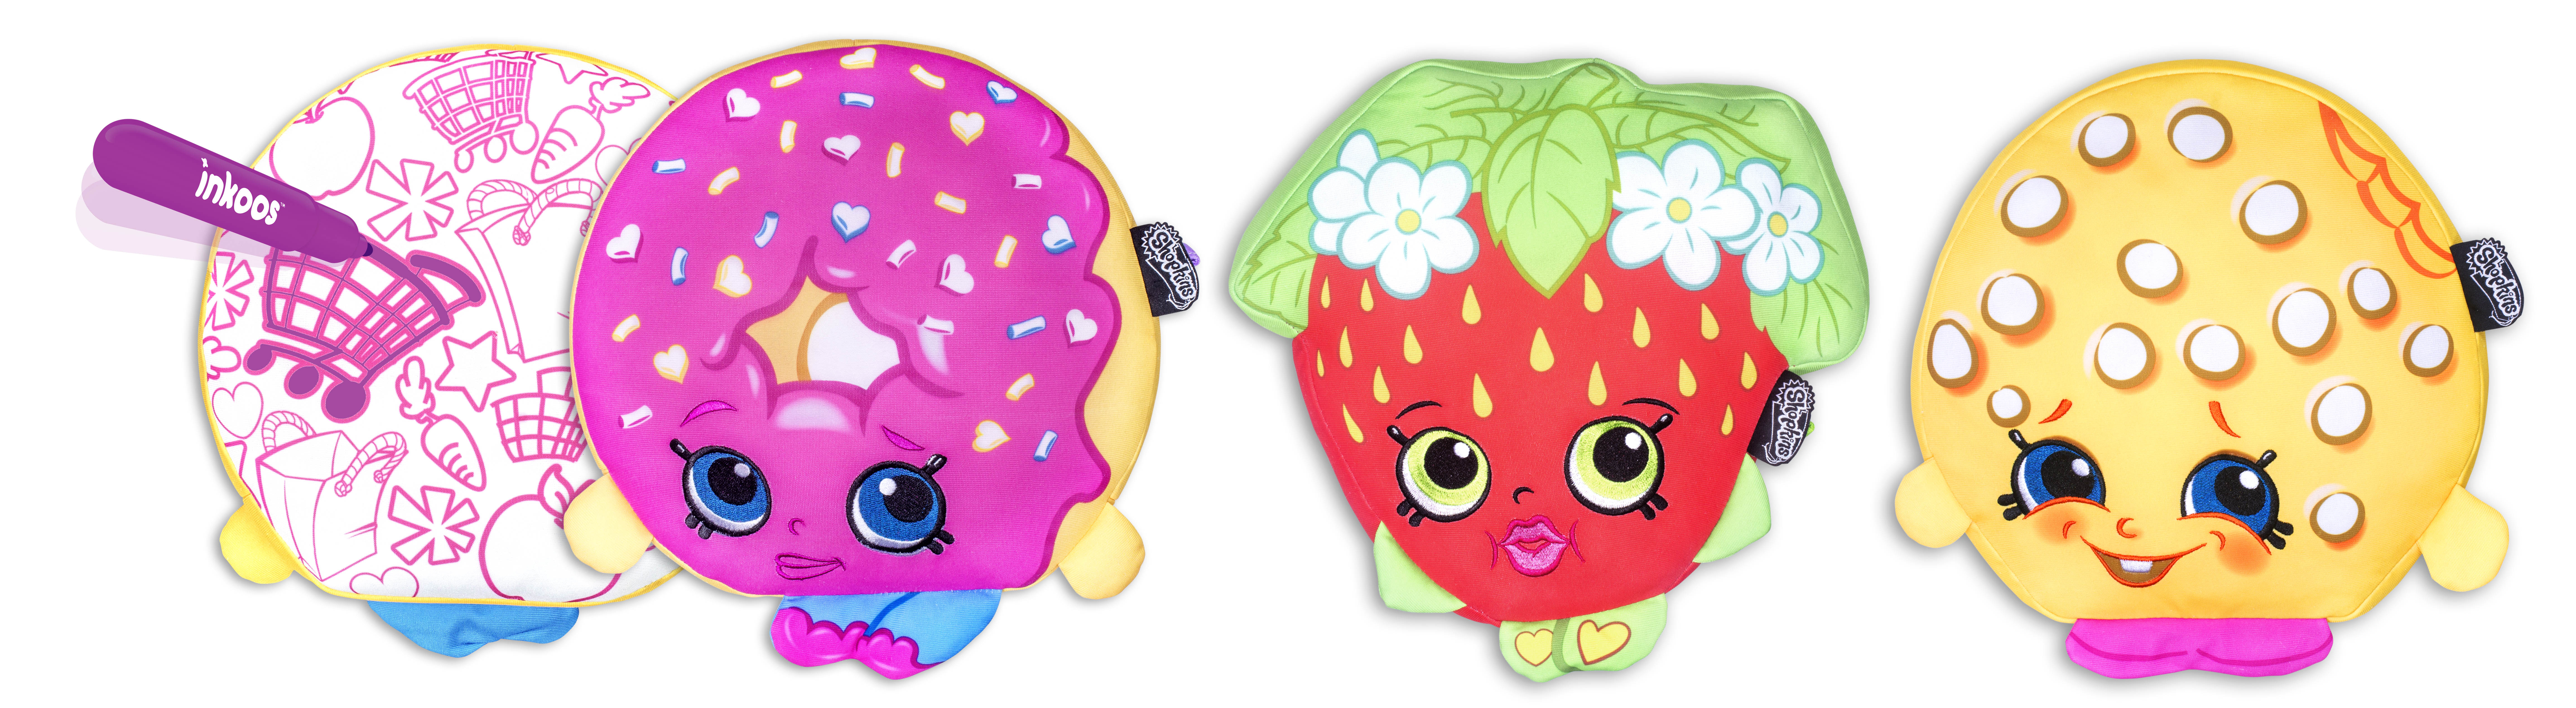 The Shopkins Color n' Create Activity Plush offer kids a cuddly and collectible friend that can be designed and decorated front to back, then washed and doodled all over again!